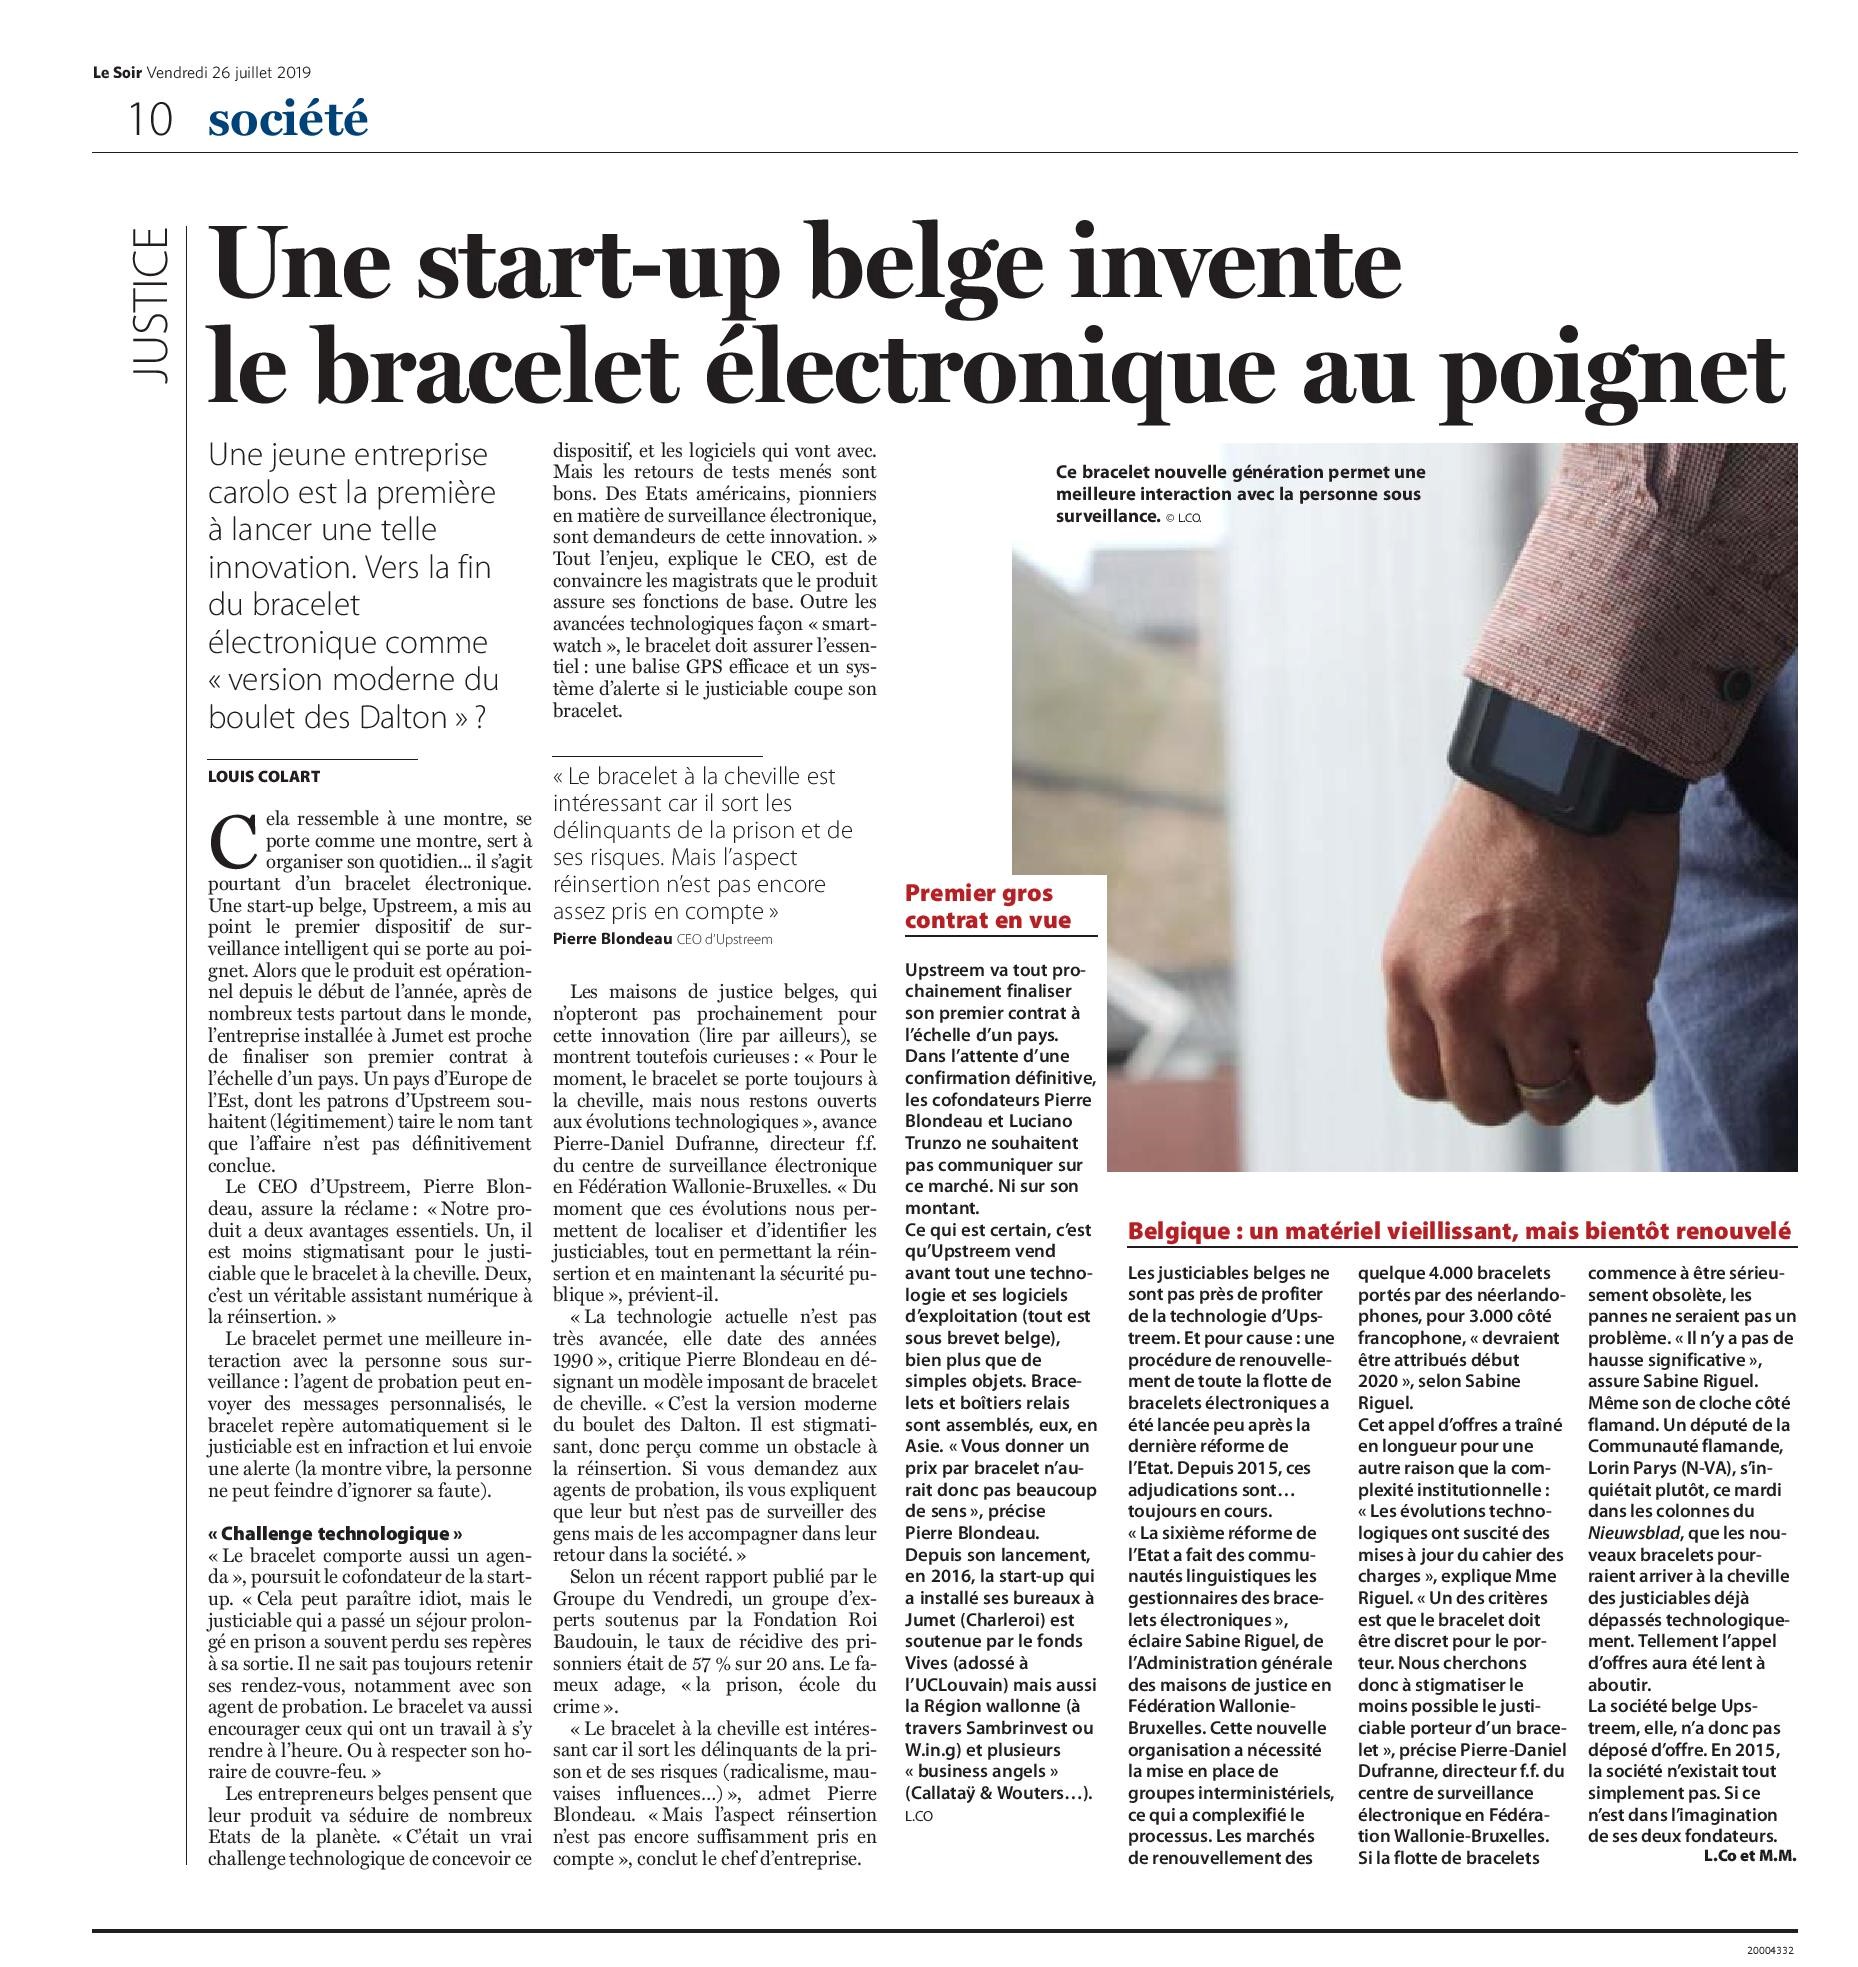 One full page on Upstreem and electronic monitoring in “Le Soir” today !